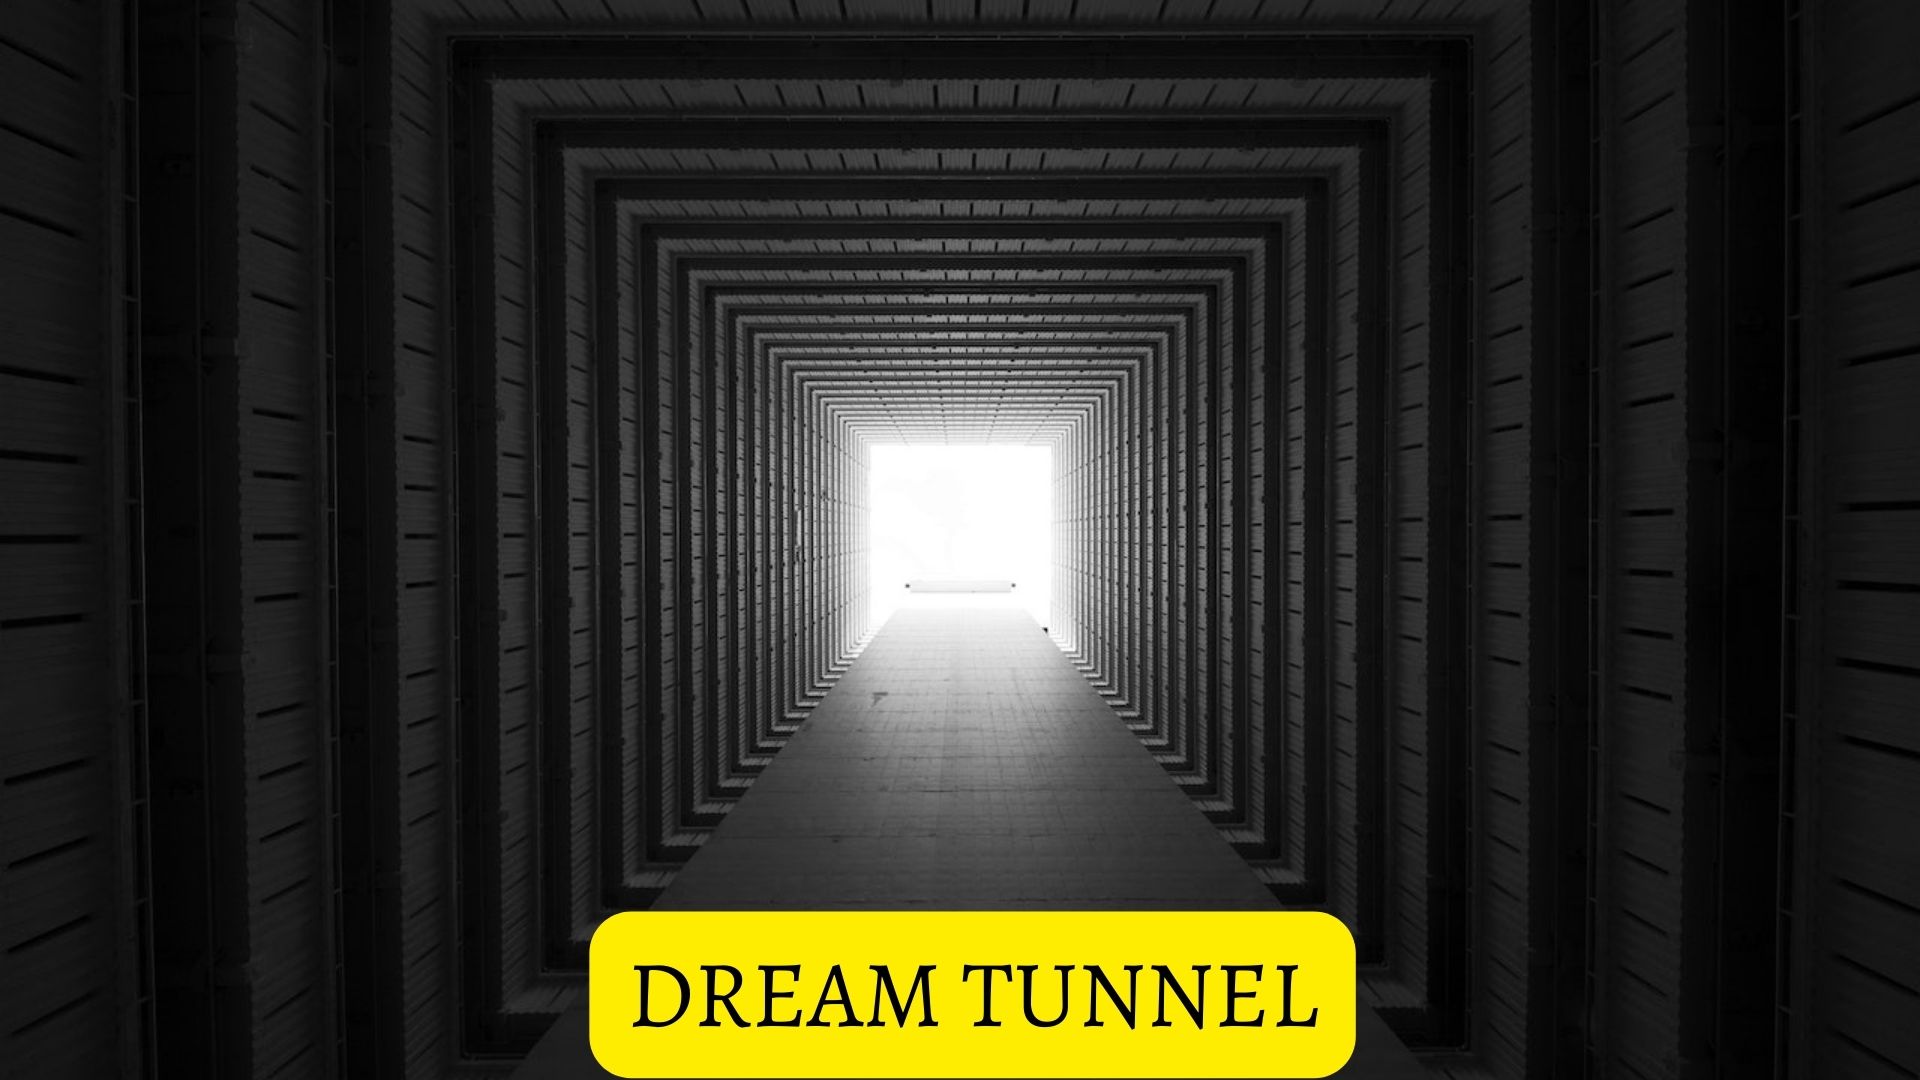 Dream Tunnel Meaning - A Feeling Of Frustration